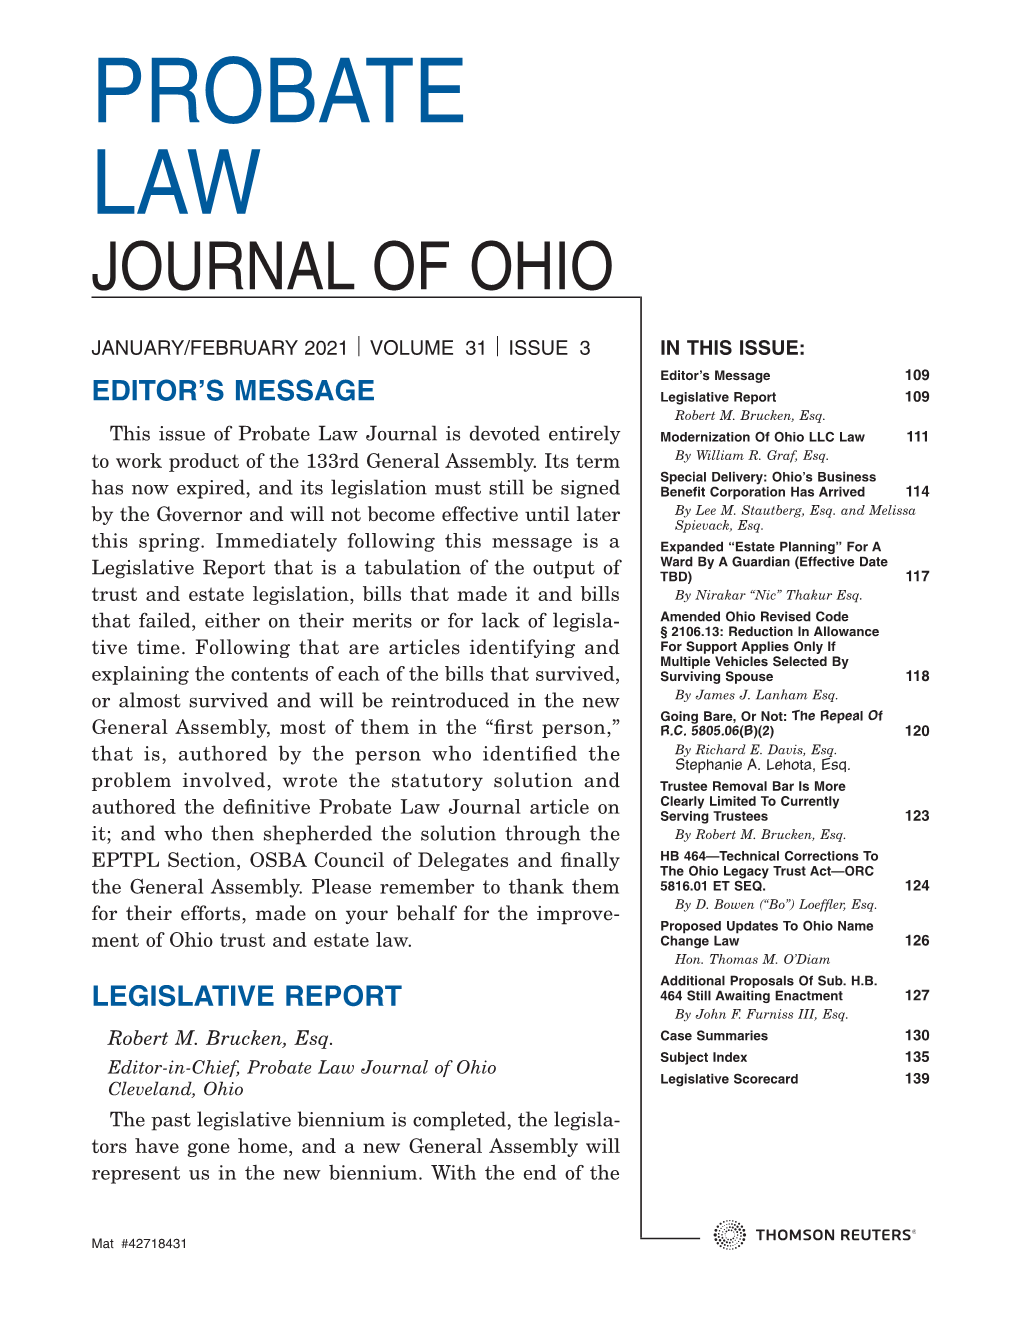 Amended Ohio Revised Code § 2106.13: Reduction in Allowance Tive Time